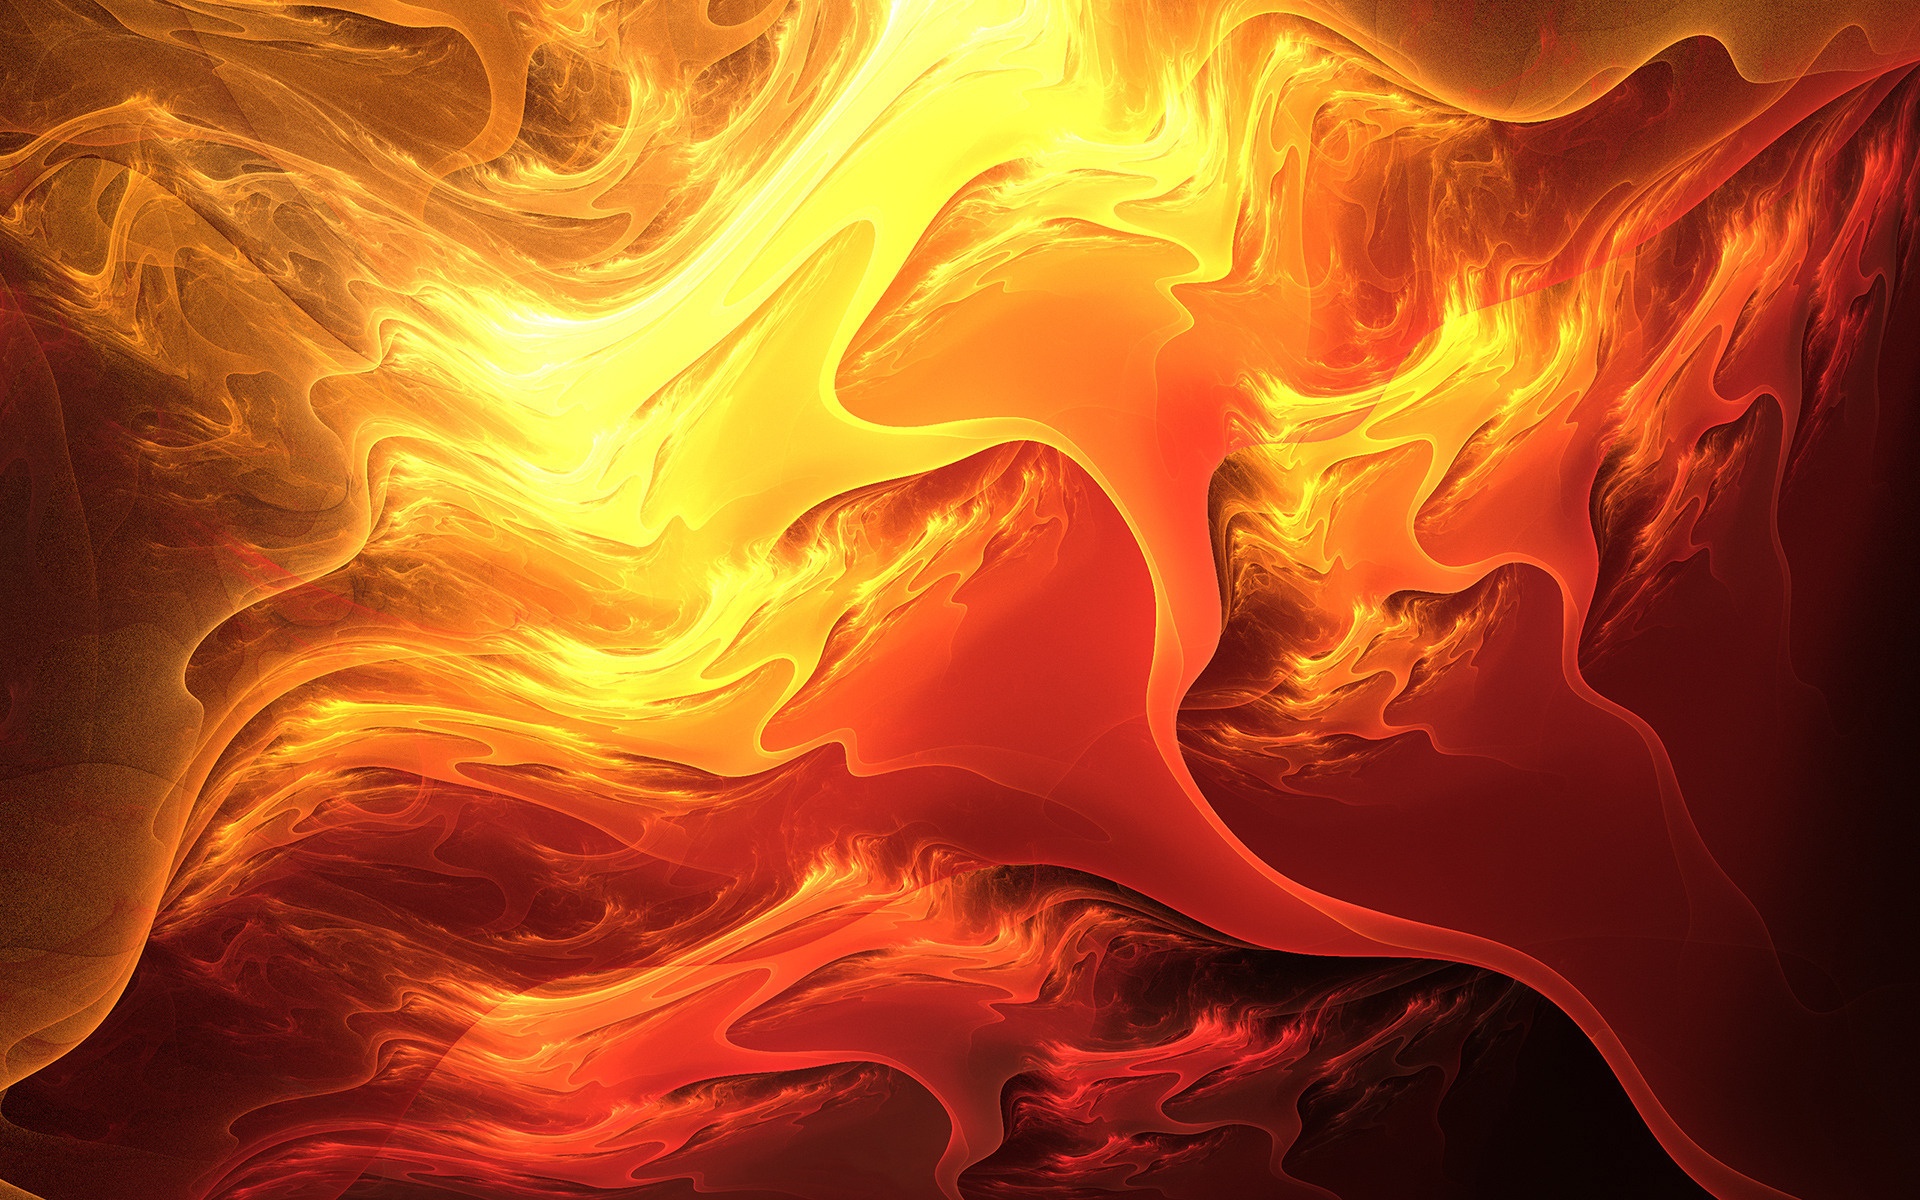 And Set Any Of These Stunning Fire Image As Your Desktop Wallpaper